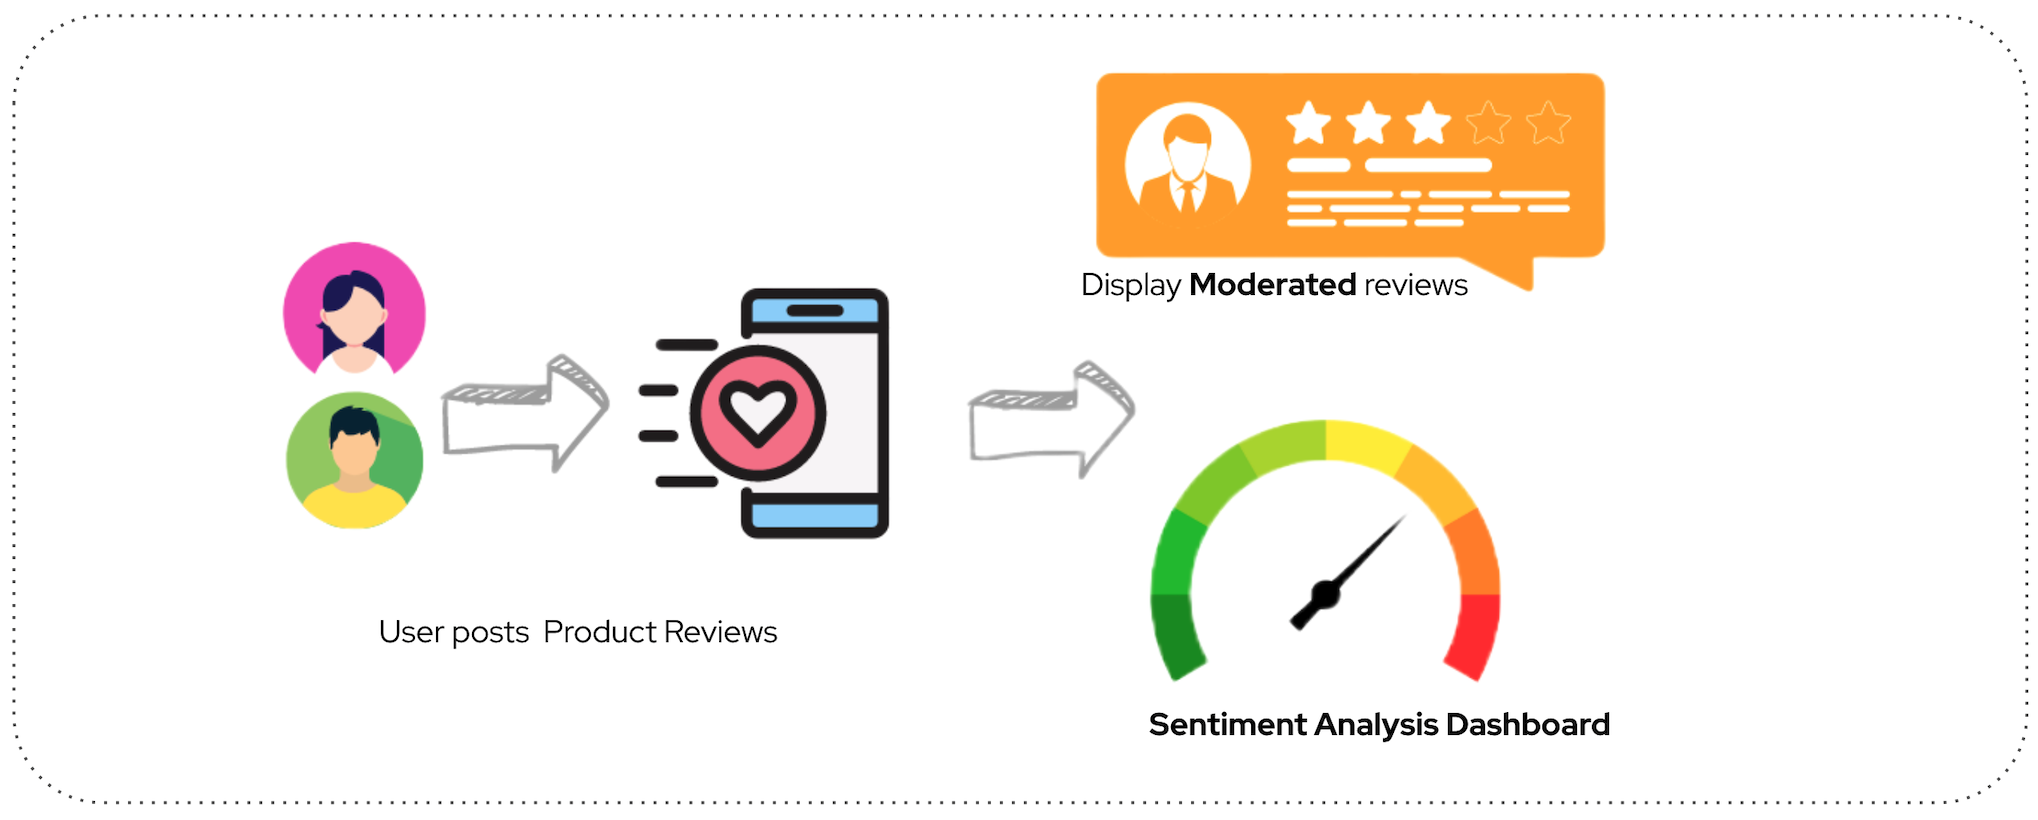 The story of product reviews moderation and analysis